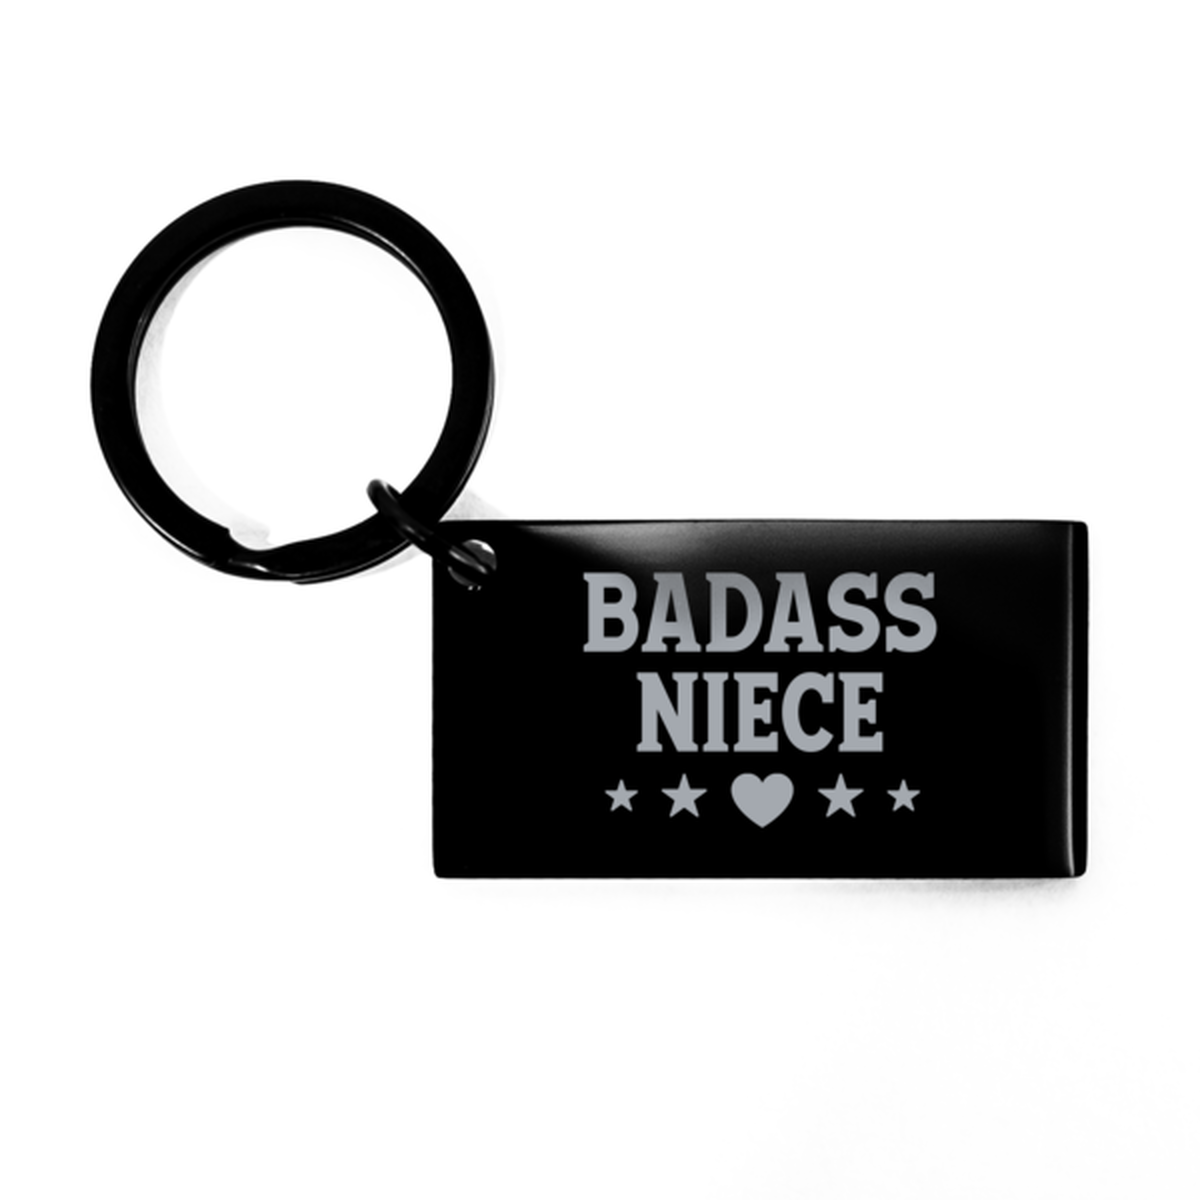 Niece Black Keychain, Badass Niece, Funny Family Gifts  Keyring For Niece From Aunt Uncle